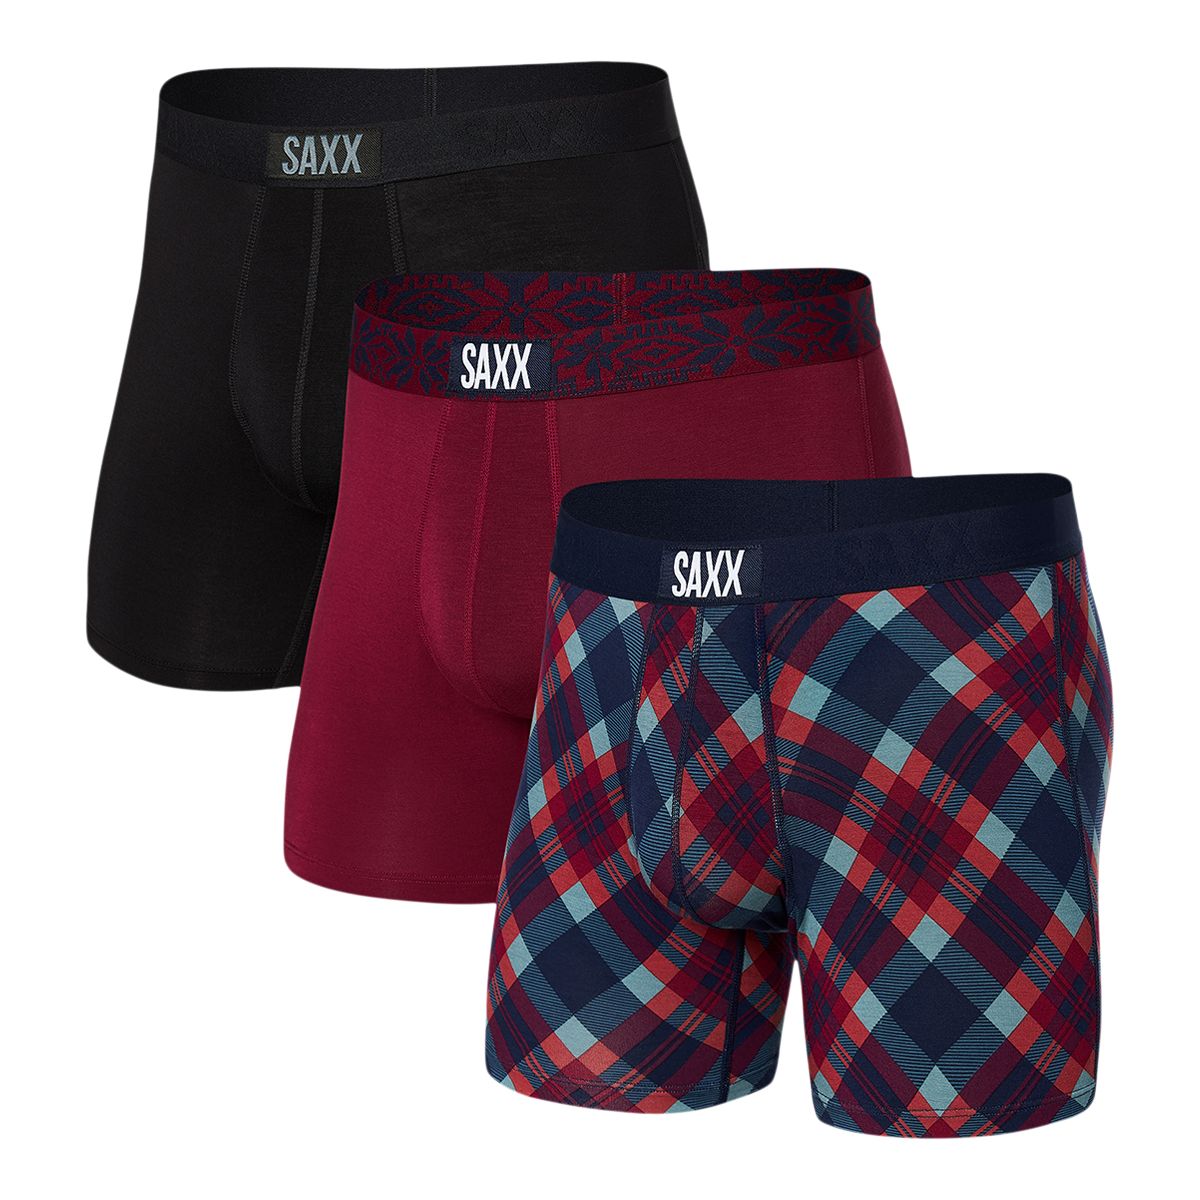 Saxx Men's Vibe Holiday Gift Box Boxer Brief - 3 Pack | SportChek